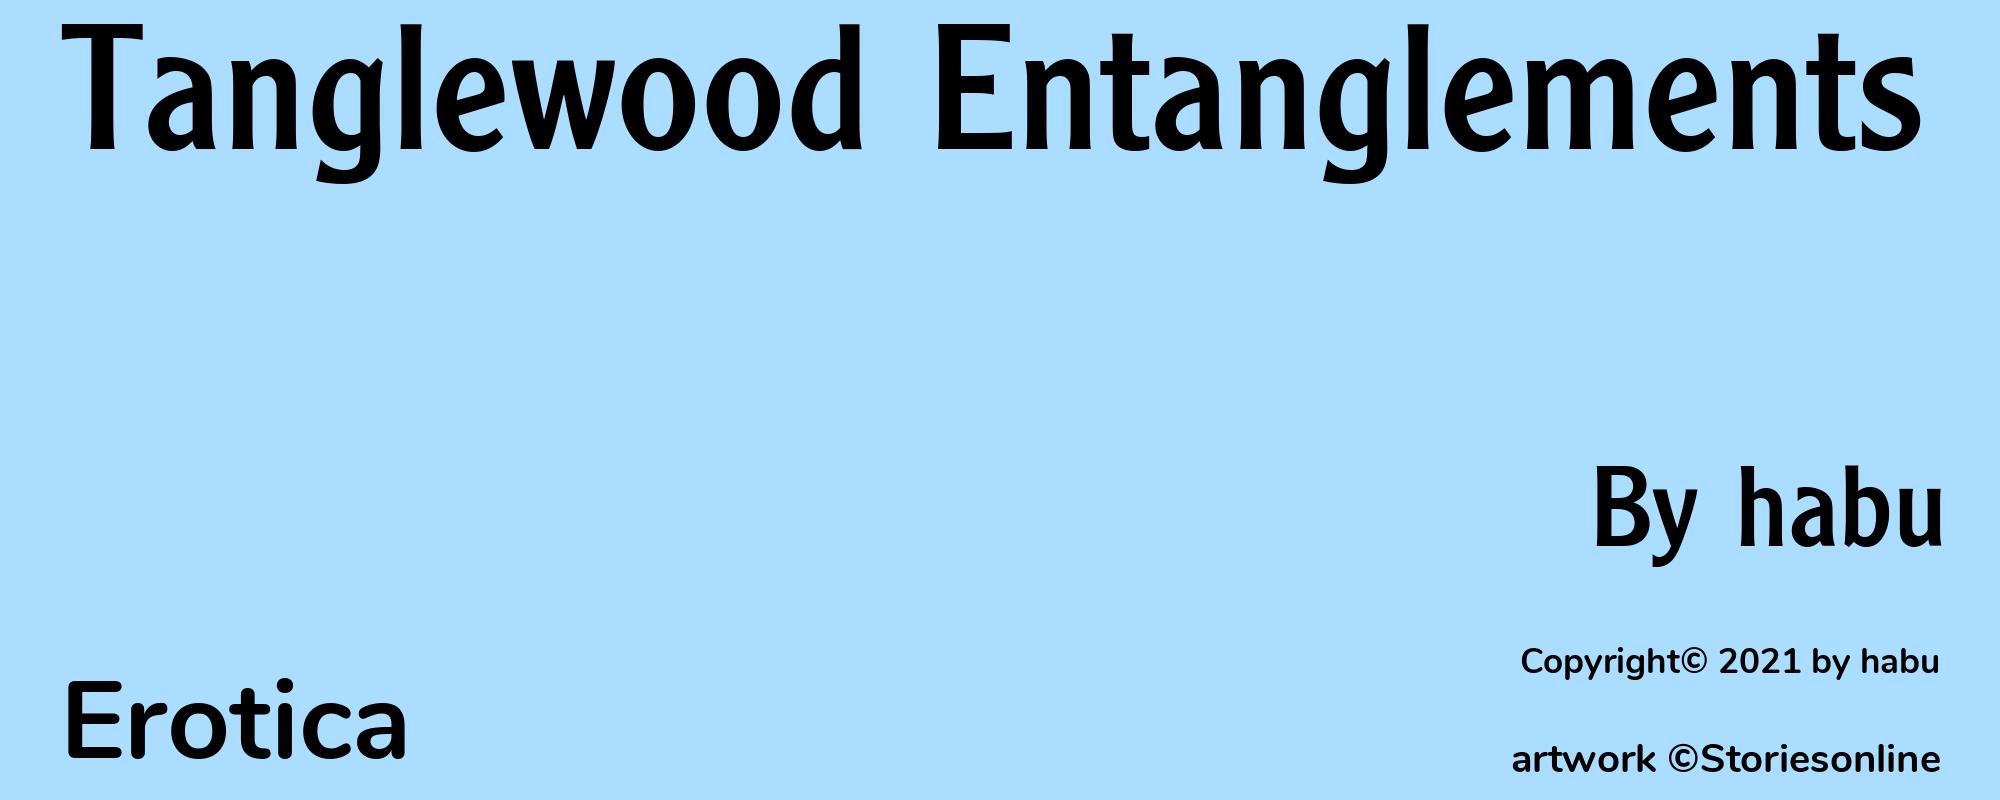 Tanglewood Entanglements - Cover